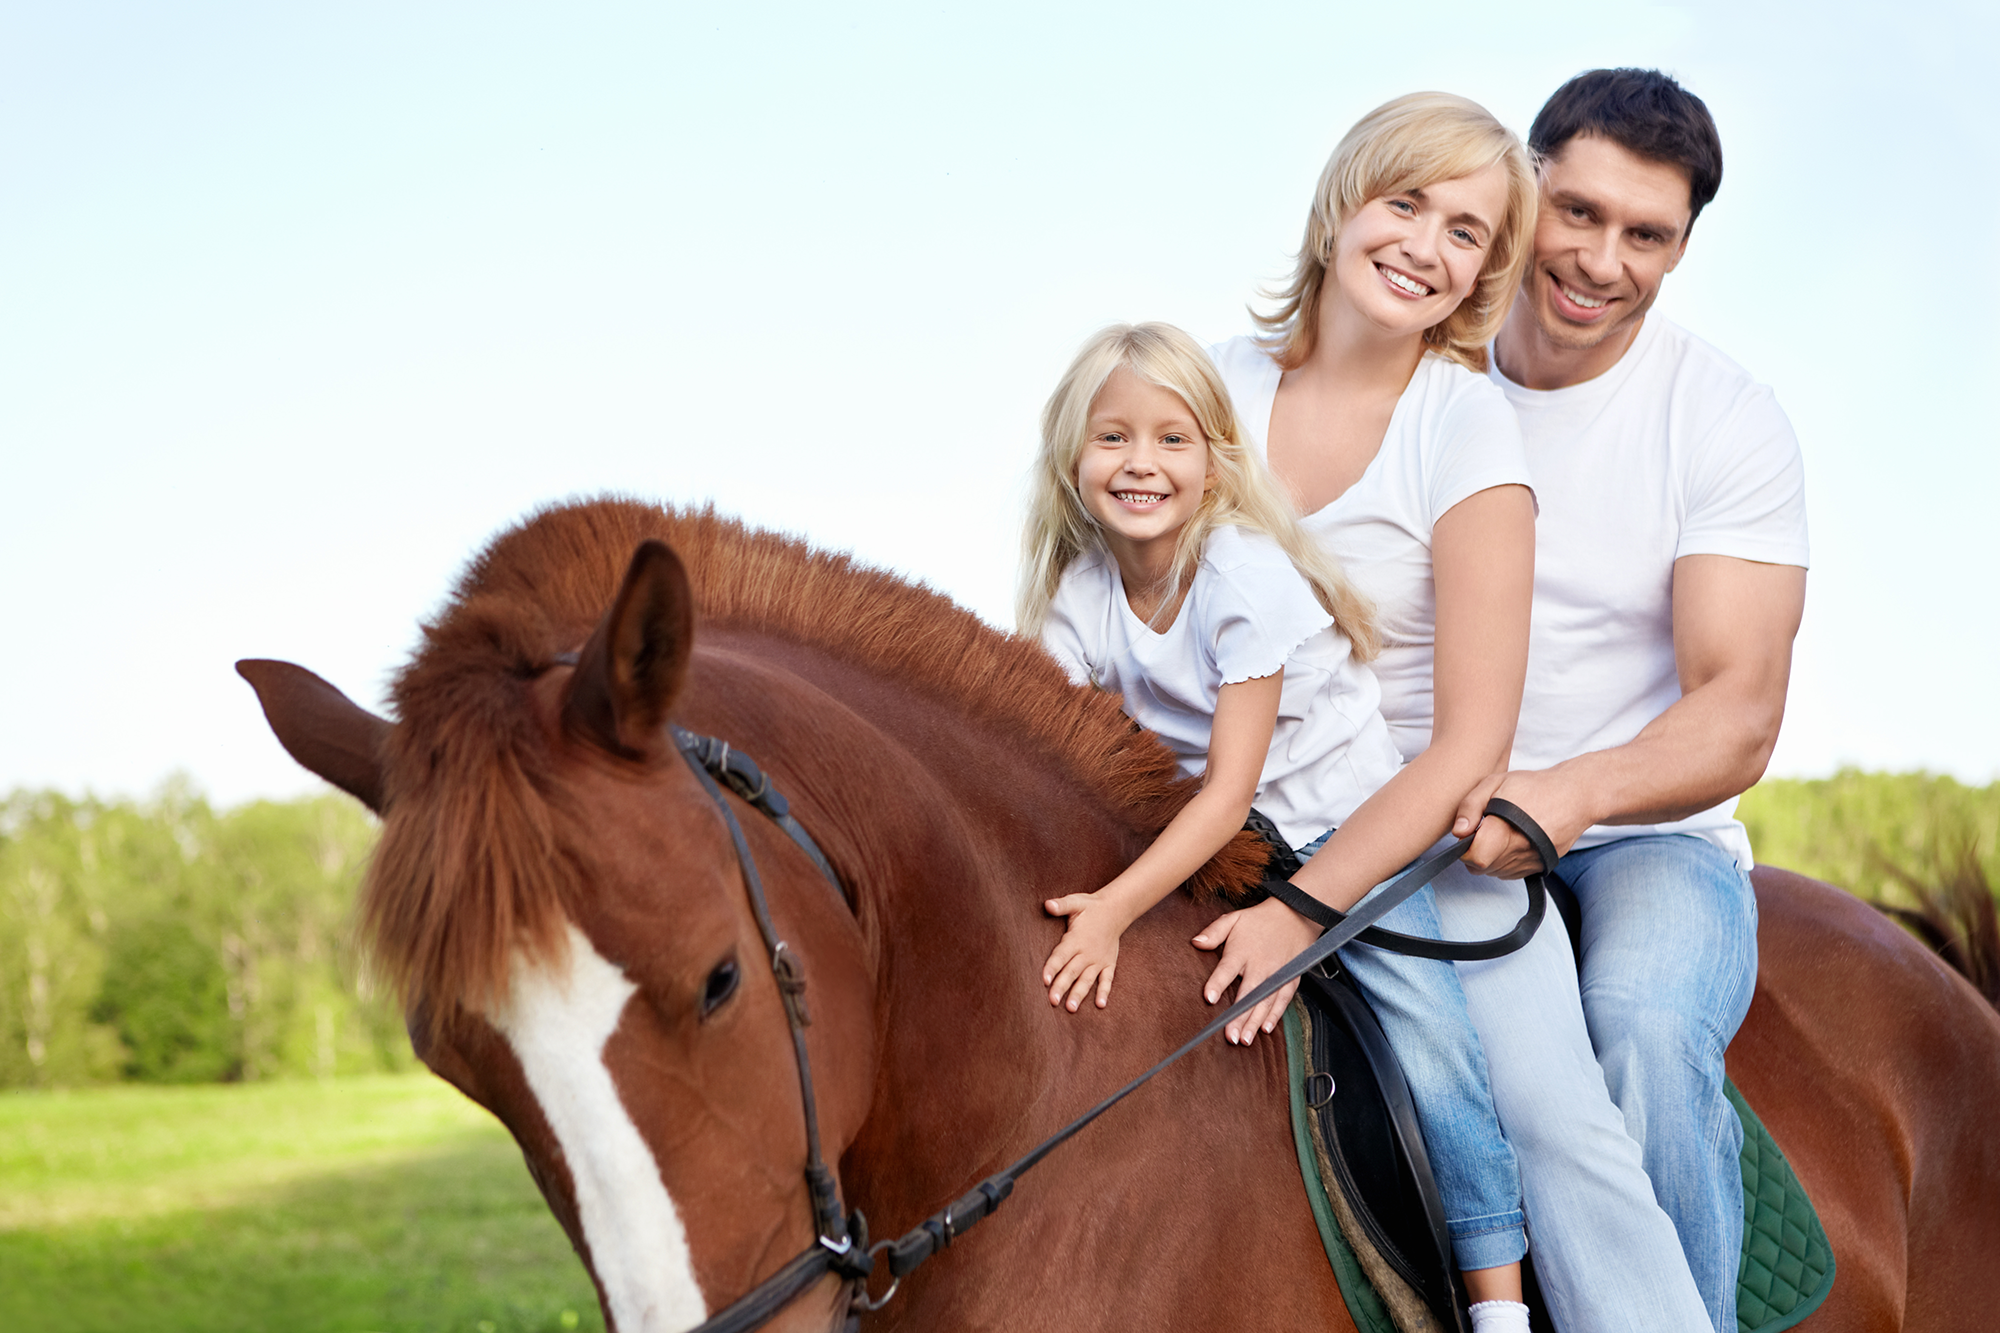 General Dentistry in Allen for Long-Term Oral Health, Home Dr. Nicholas Cox Dr. David Toney Cox Family Dentistry General, Cosmetic, Restorative, Preventative, Family Dentistry in Allen, TX 75002